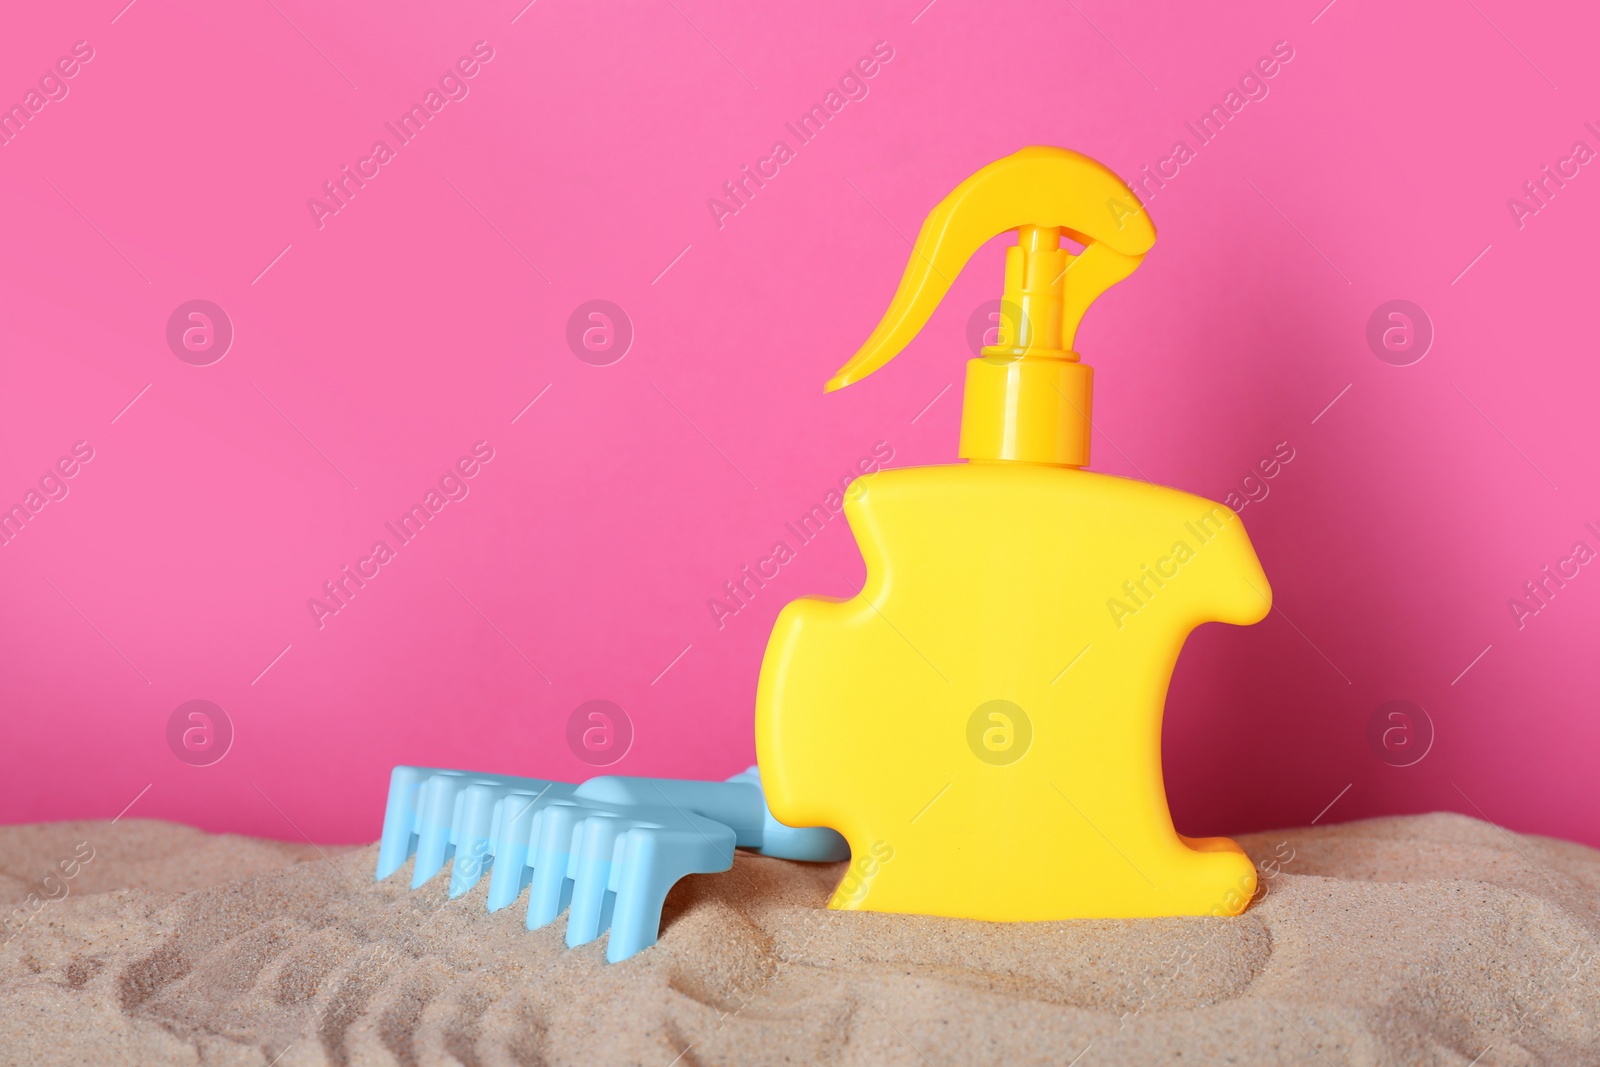 Photo of Suntan product and plastic beach toy on sand against pink background